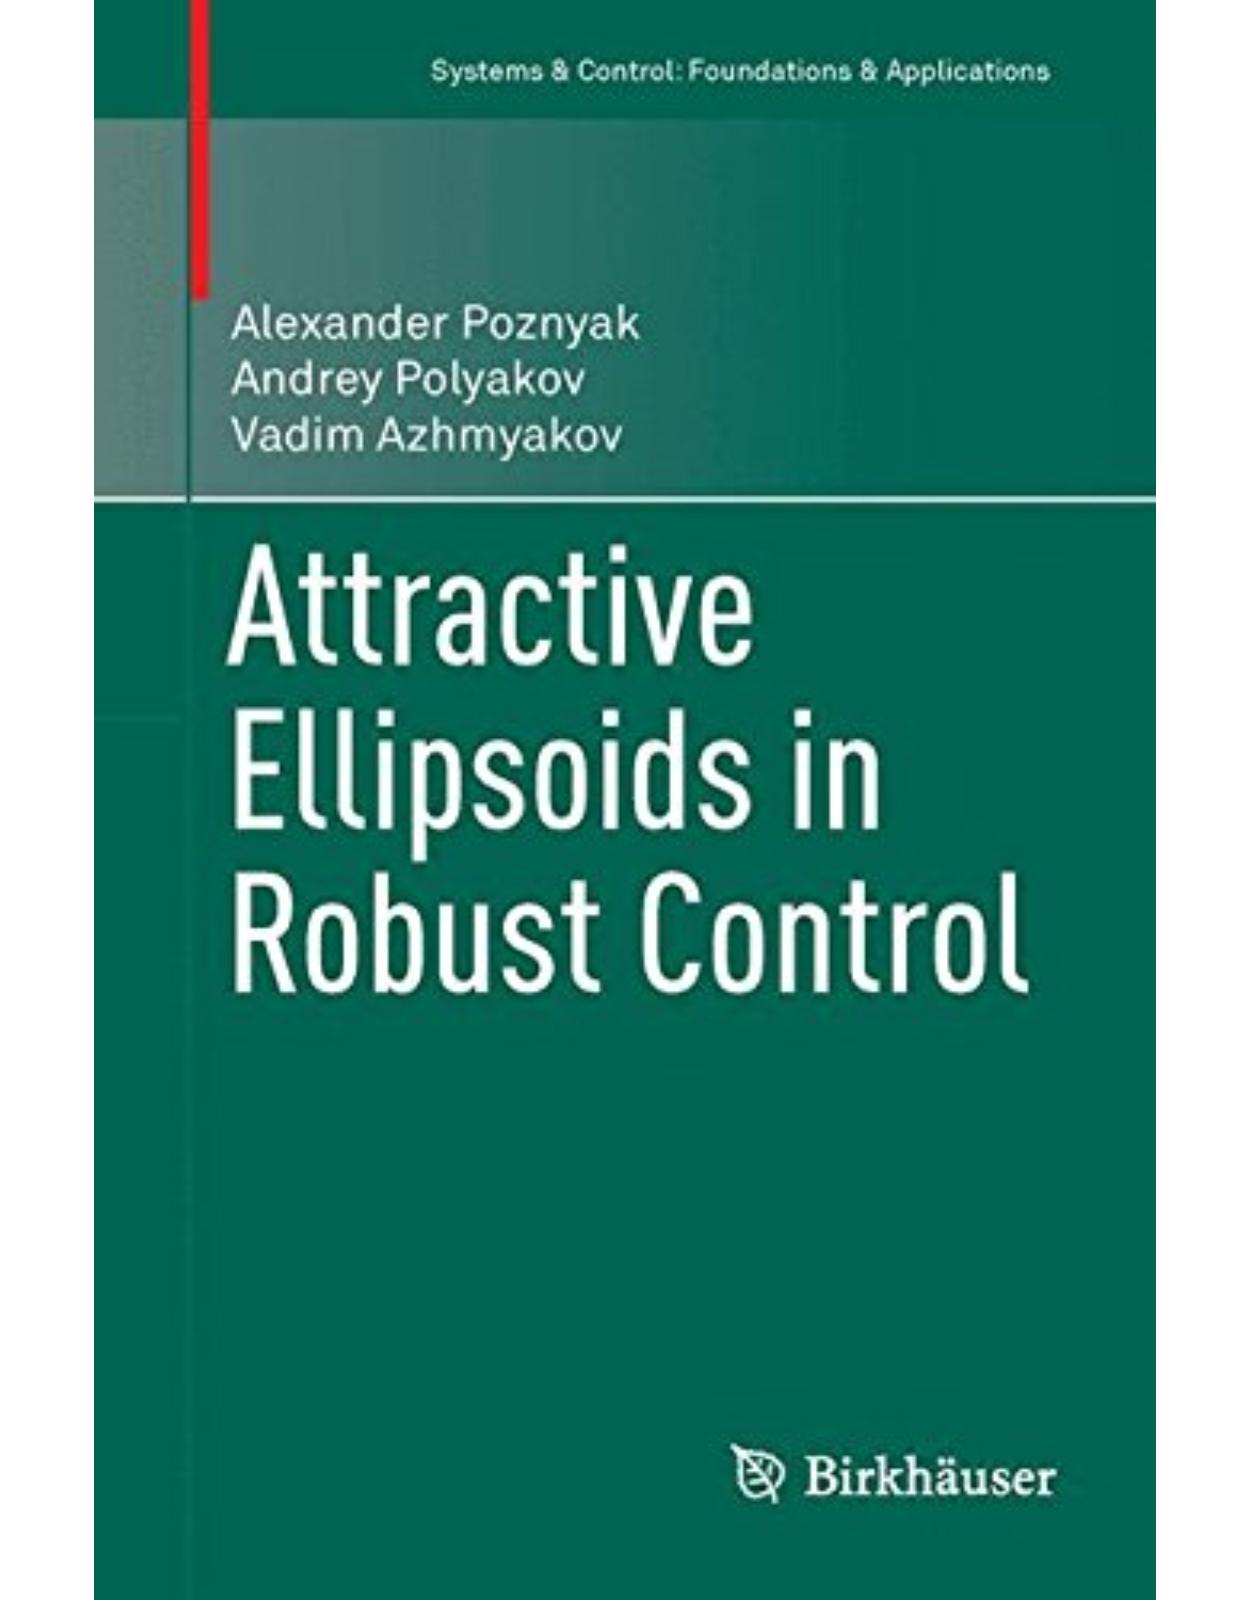 Attractive Ellipsoids in Robust Control